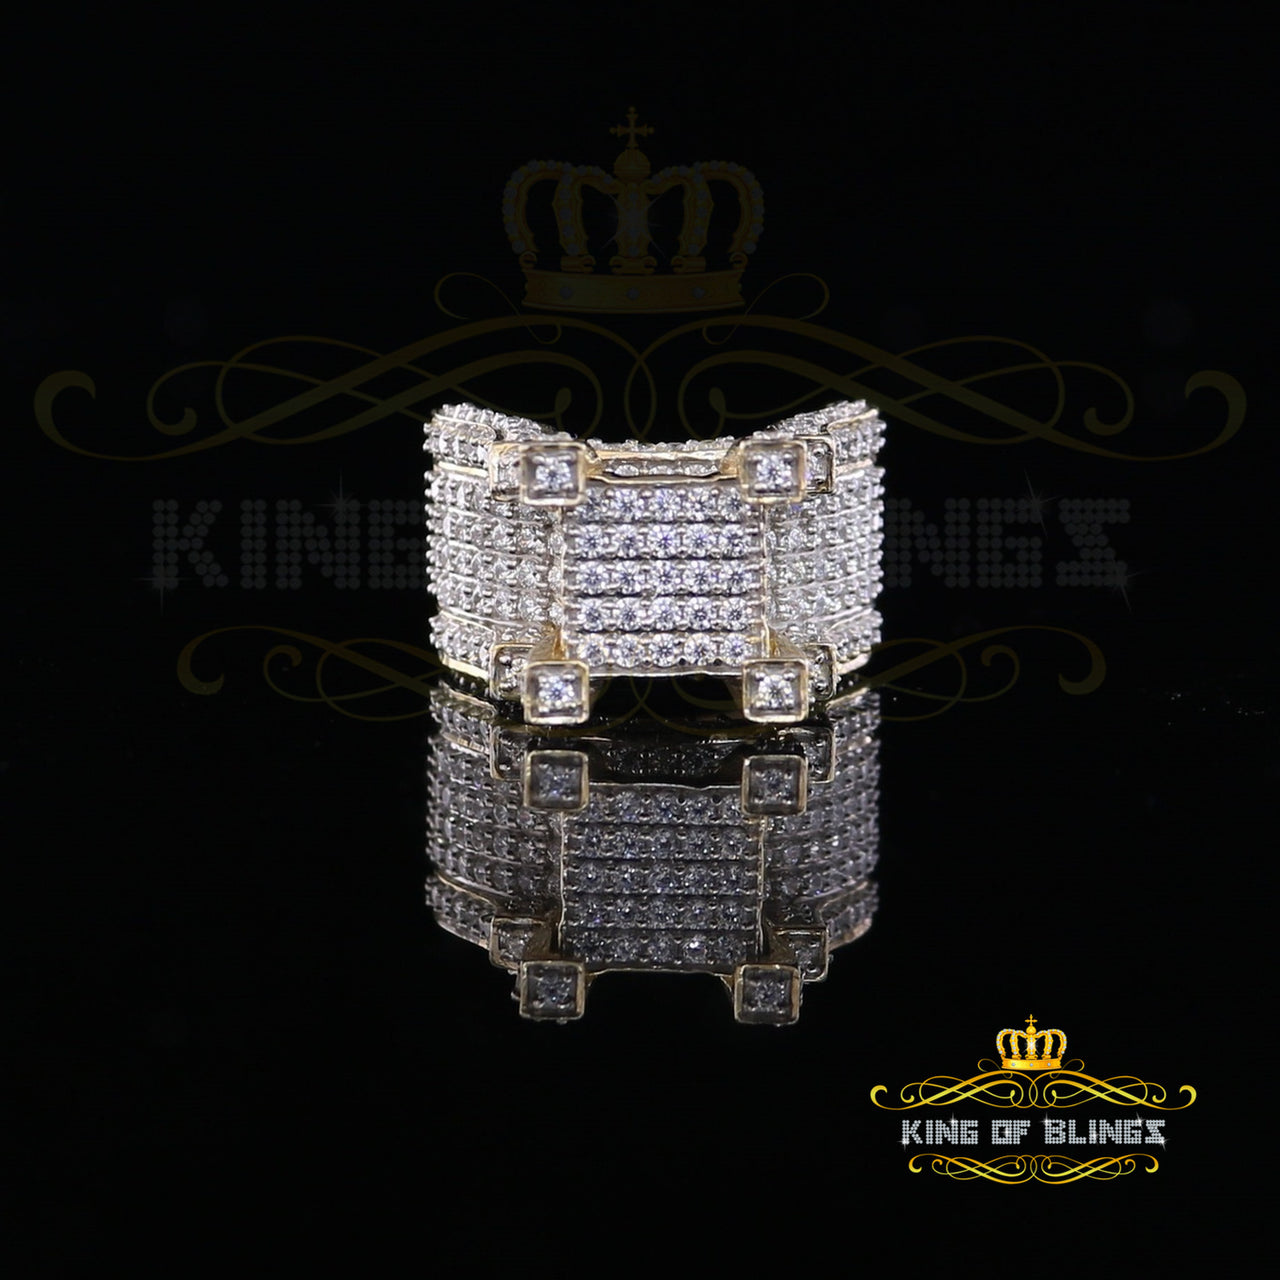 King Of Bling's King Of Blings Yellow 4.50ct Cubic Zirconia Silver Fashion Womens Ring size 6.5 KING OF BLINGS